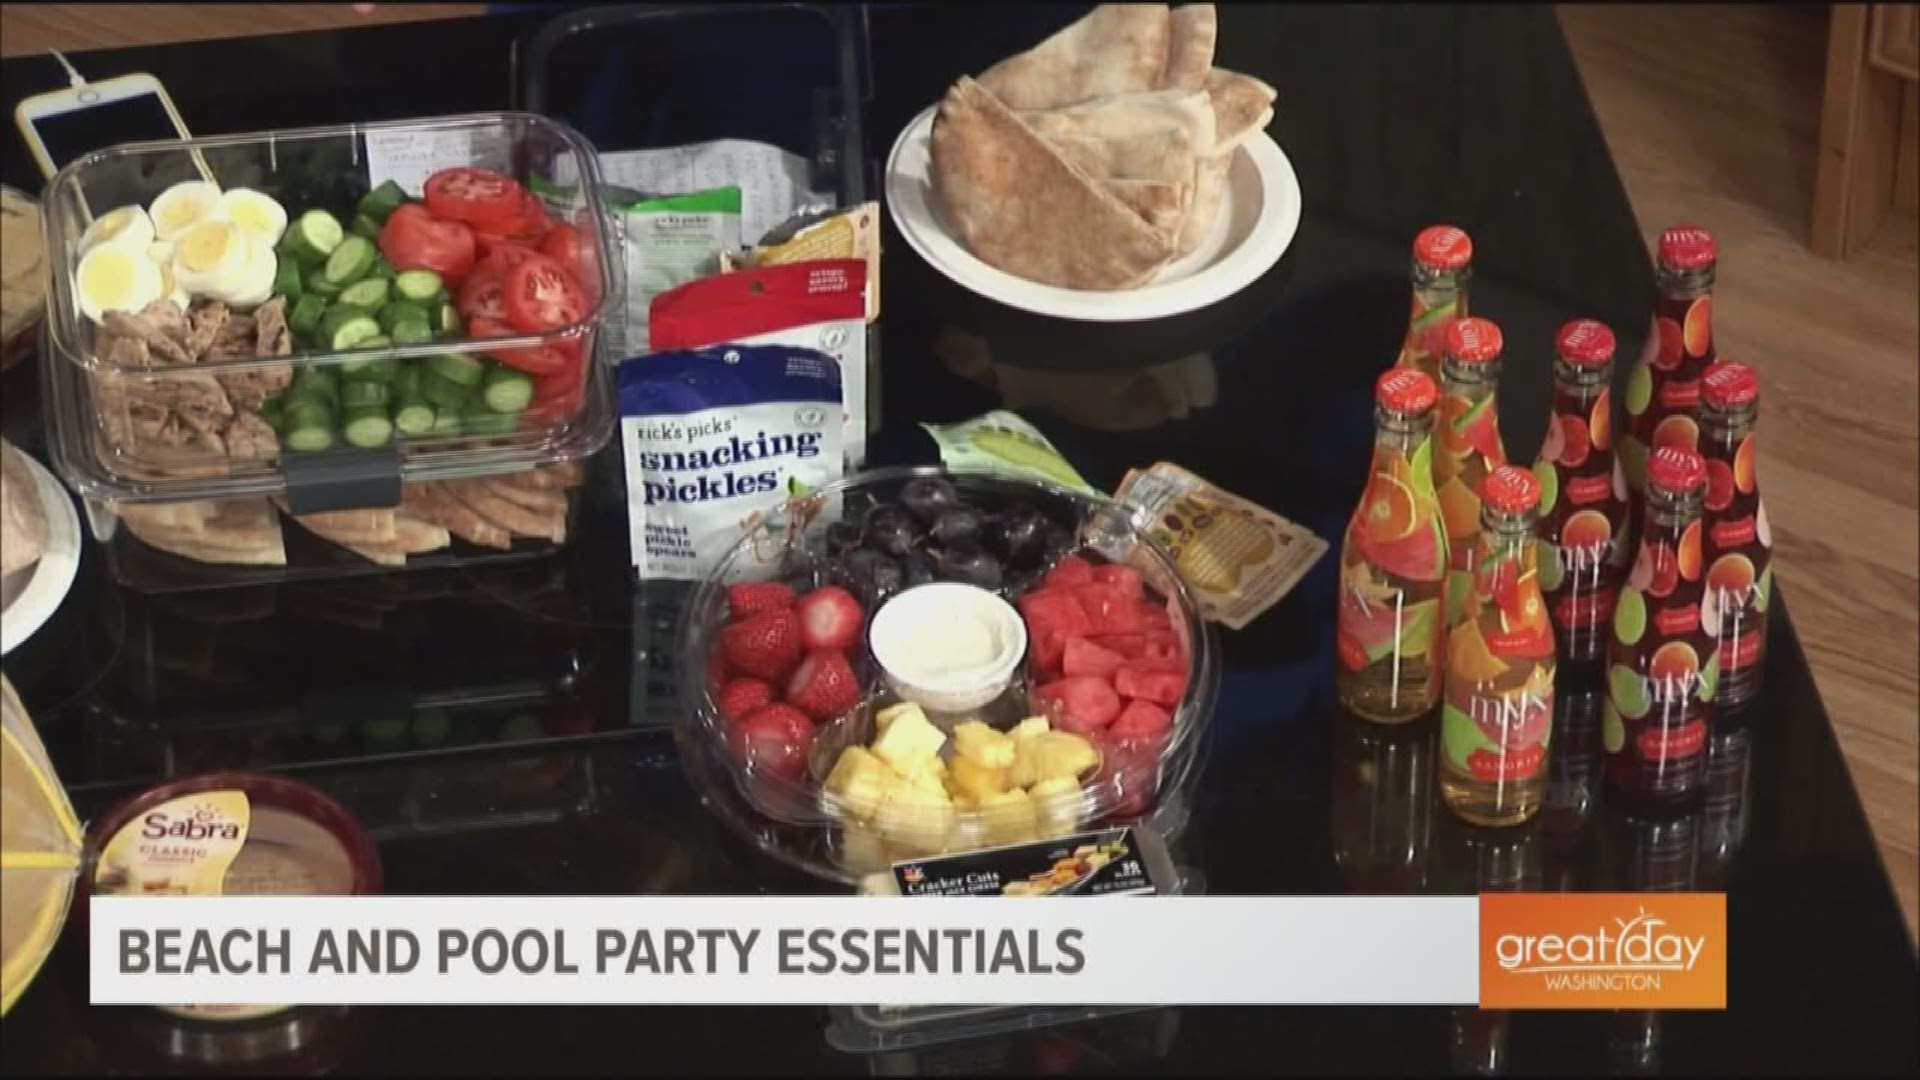 Party planner Limor Suss has all the summer beach and pool essentials.